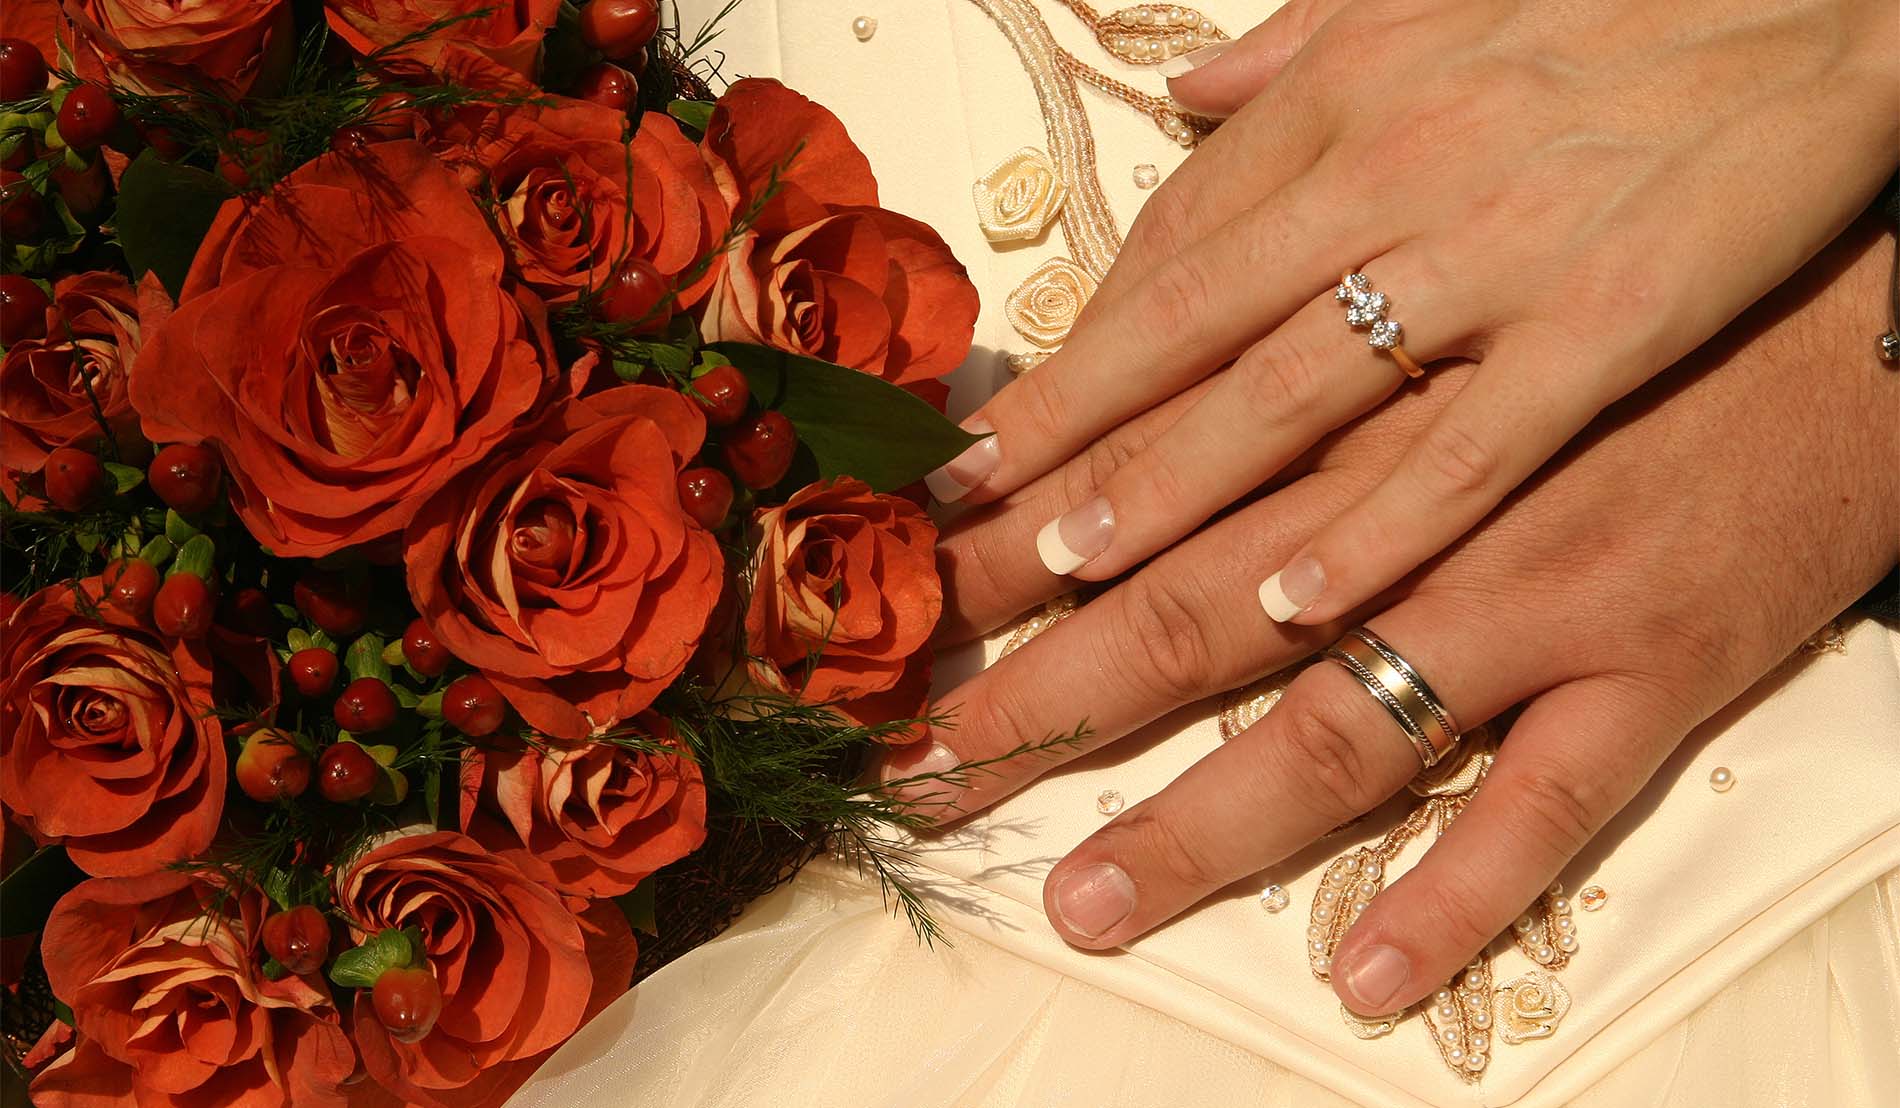 Groom and bride's hands with wedding rings alongside bouquet of red roses